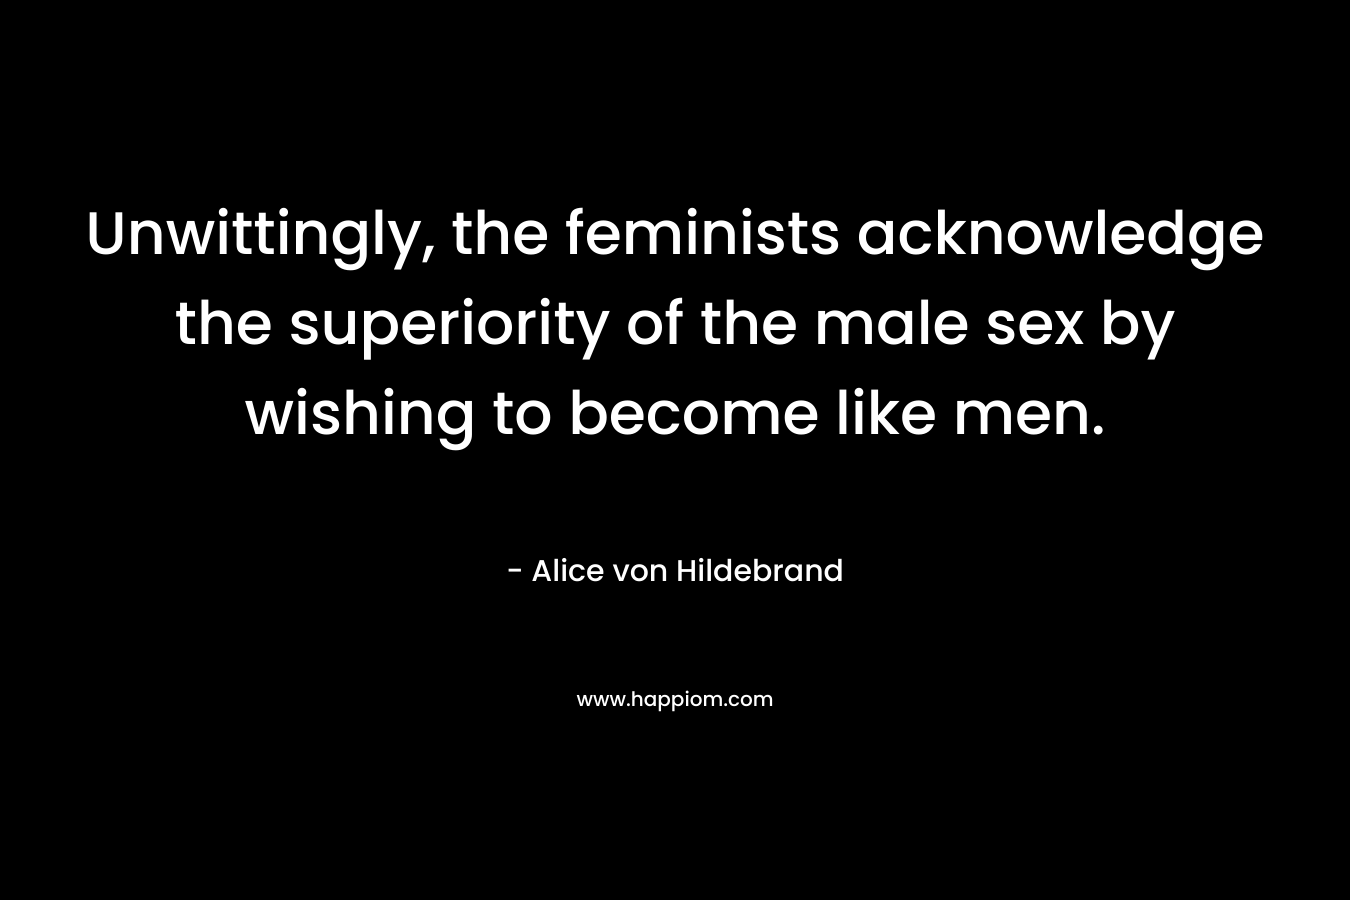 Unwittingly, the feminists acknowledge the superiority of the male sex by wishing to become like men. – Alice von Hildebrand